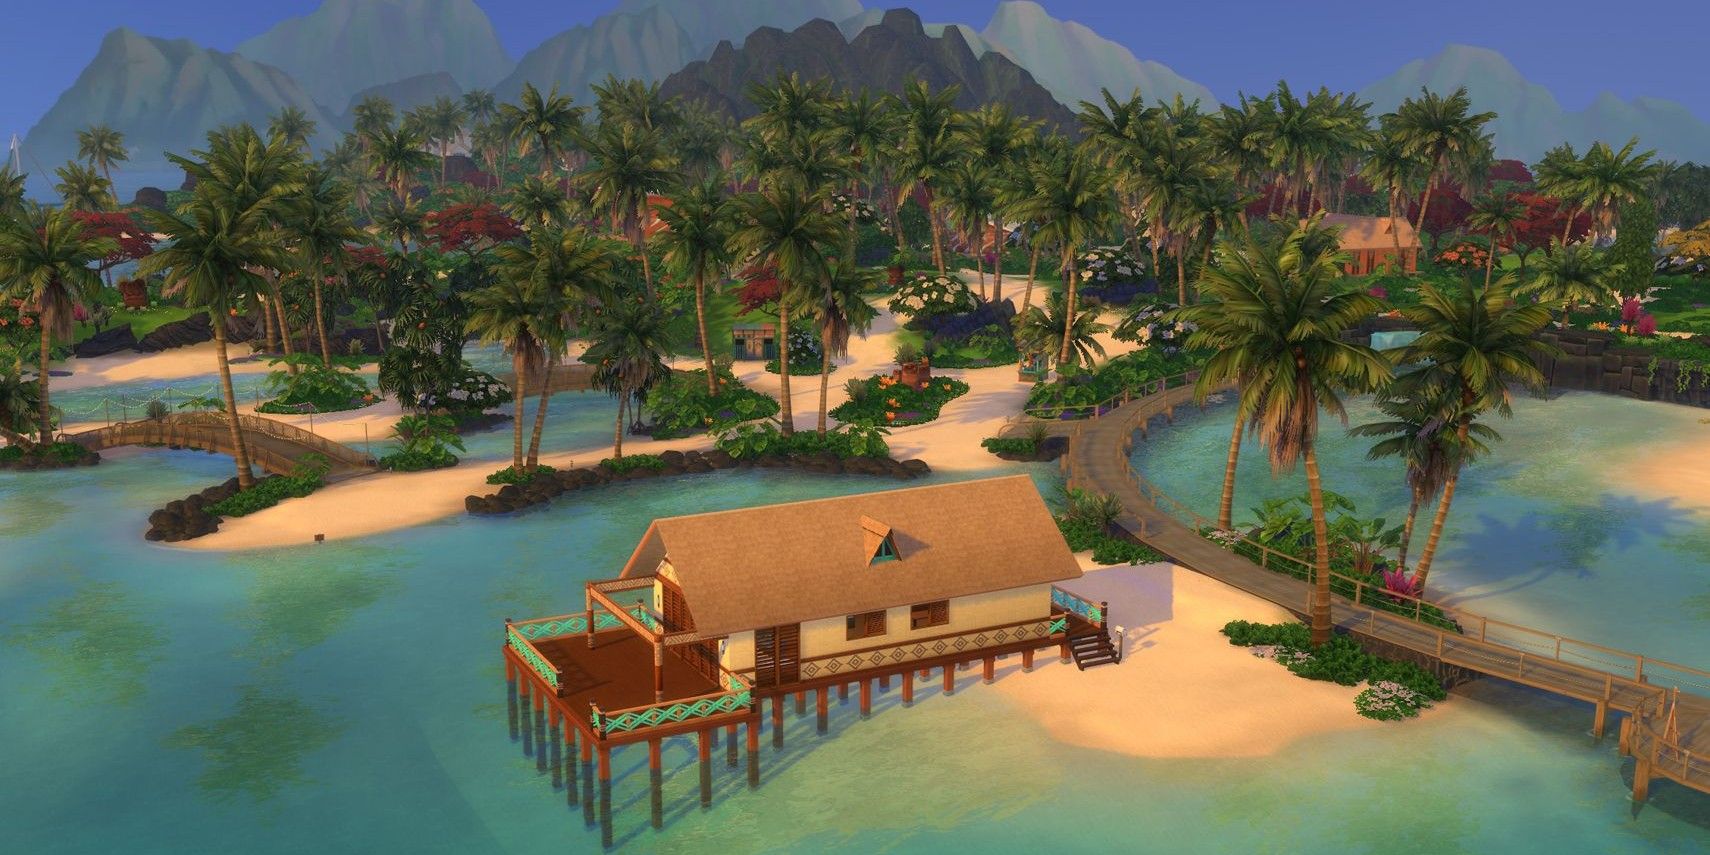 The Sims 5 Needs Actual Locations Not Rabbit Holes